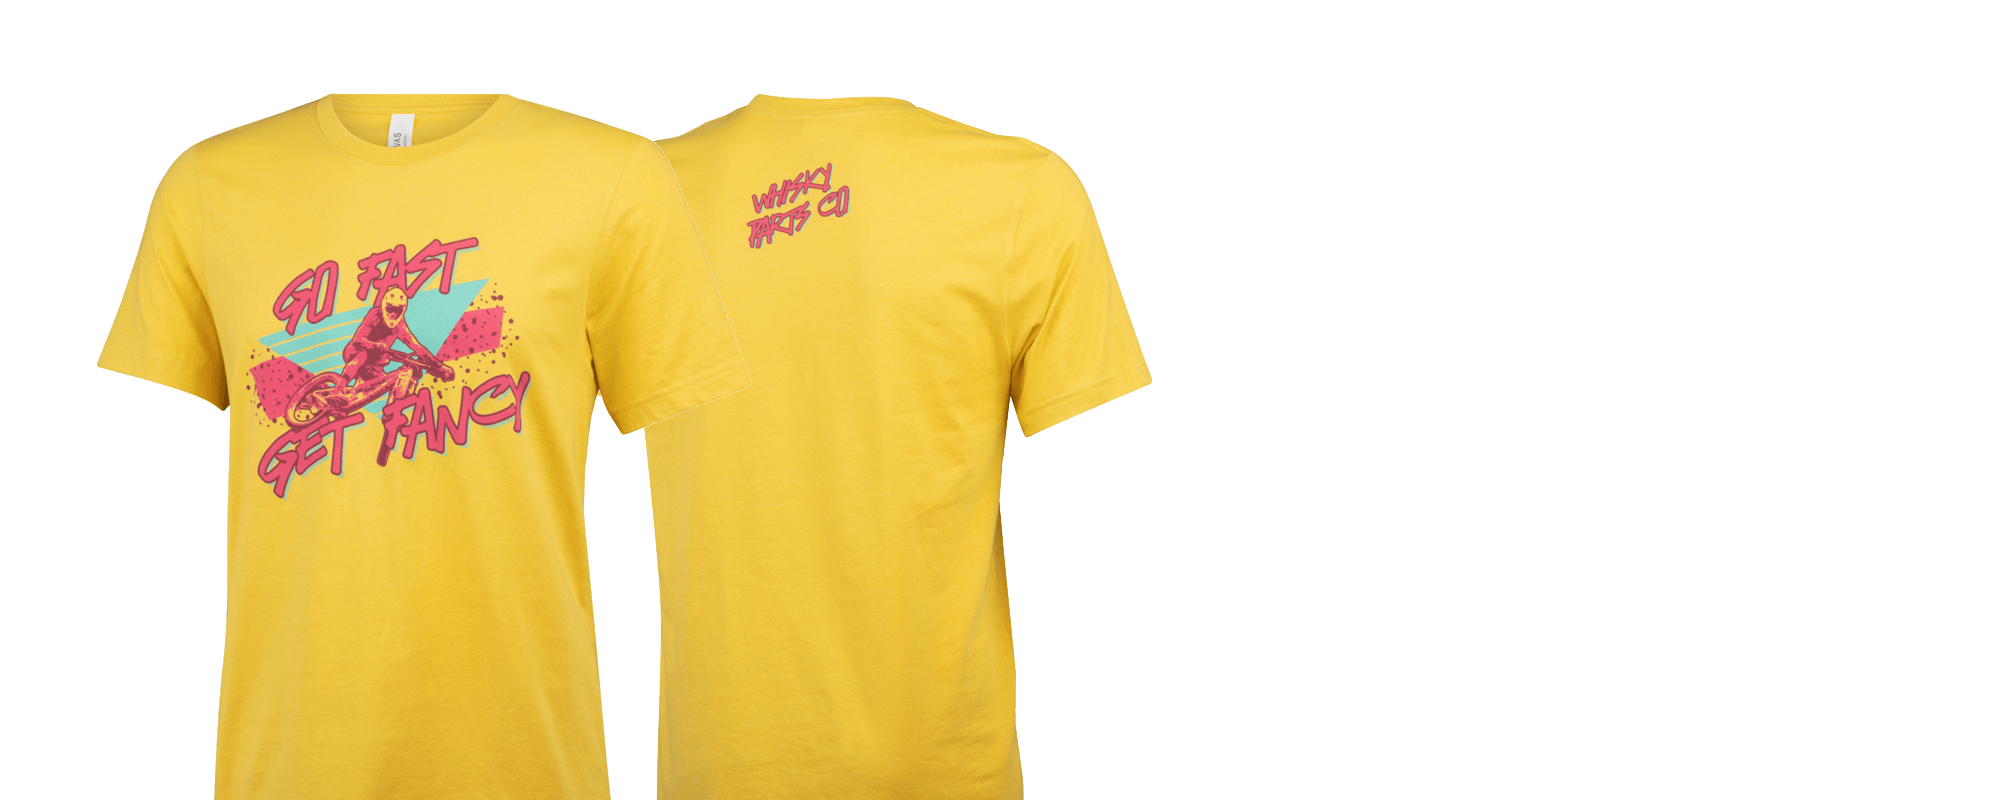 Whisky it's the 90s t-shirt - Yellow - Front and back views are shown